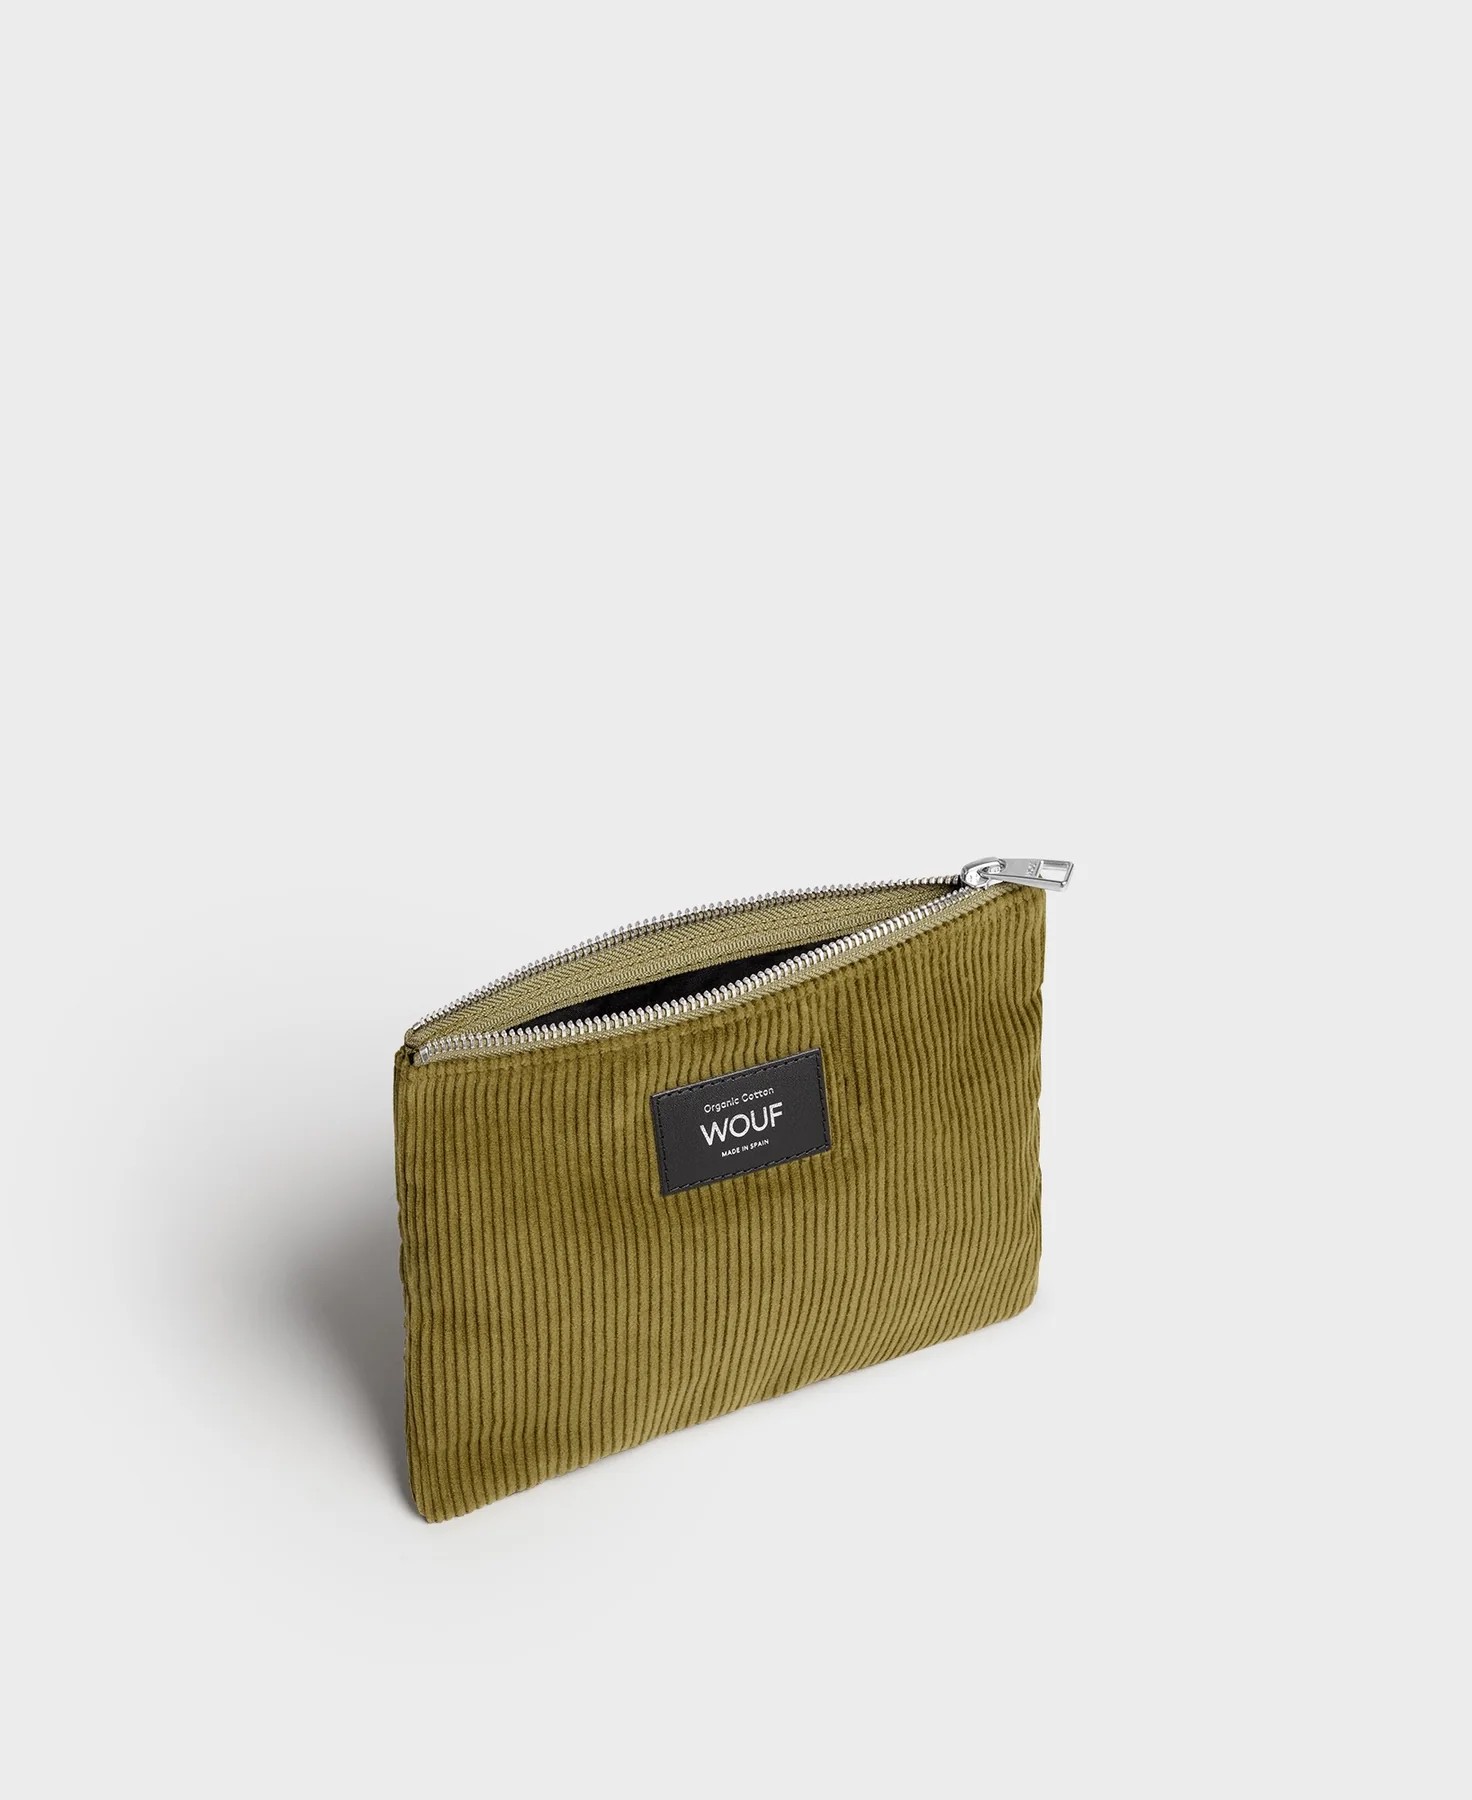 Wouf Olive Pouch Çanta